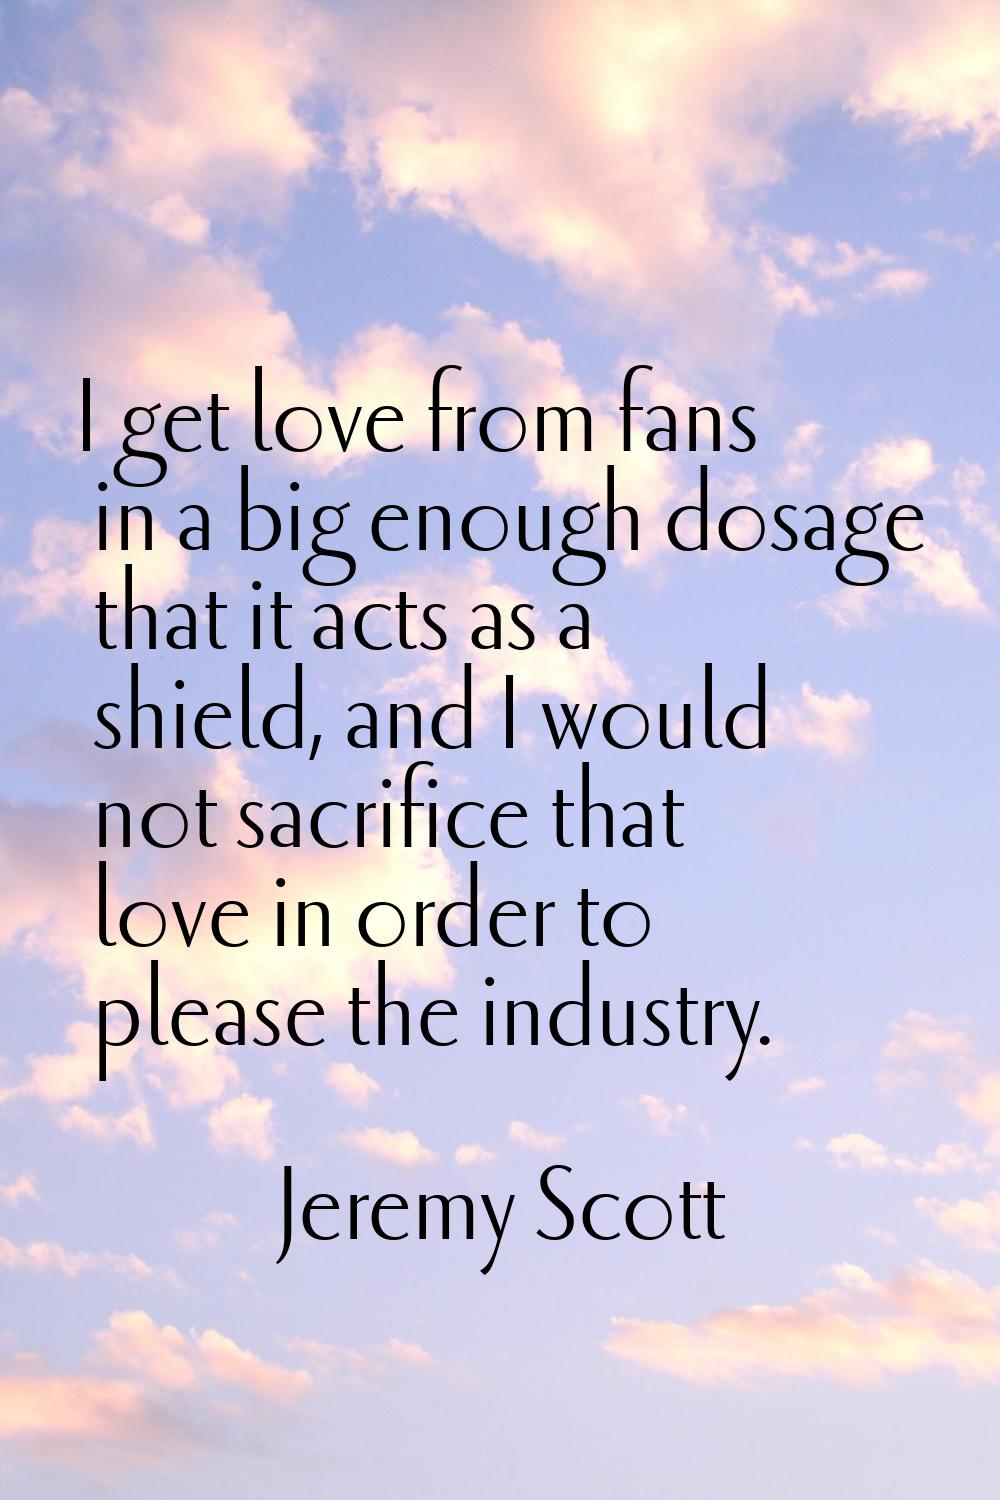 I get love from fans in a big enough dosage that it acts as a shield, and I would not sacrifice tha